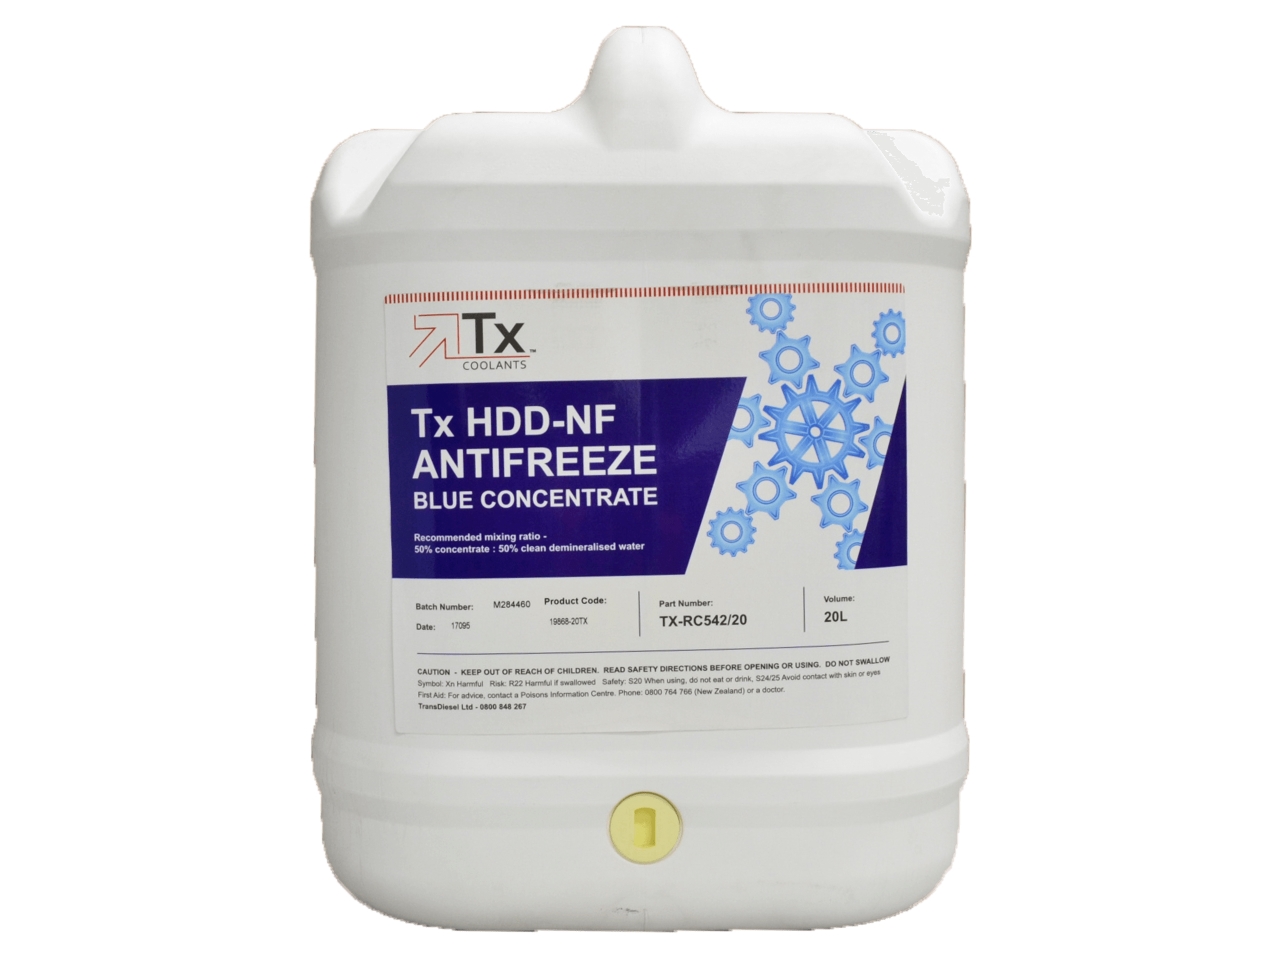 Tx HDD-NF Antifreeze Blue Concentrate 20L